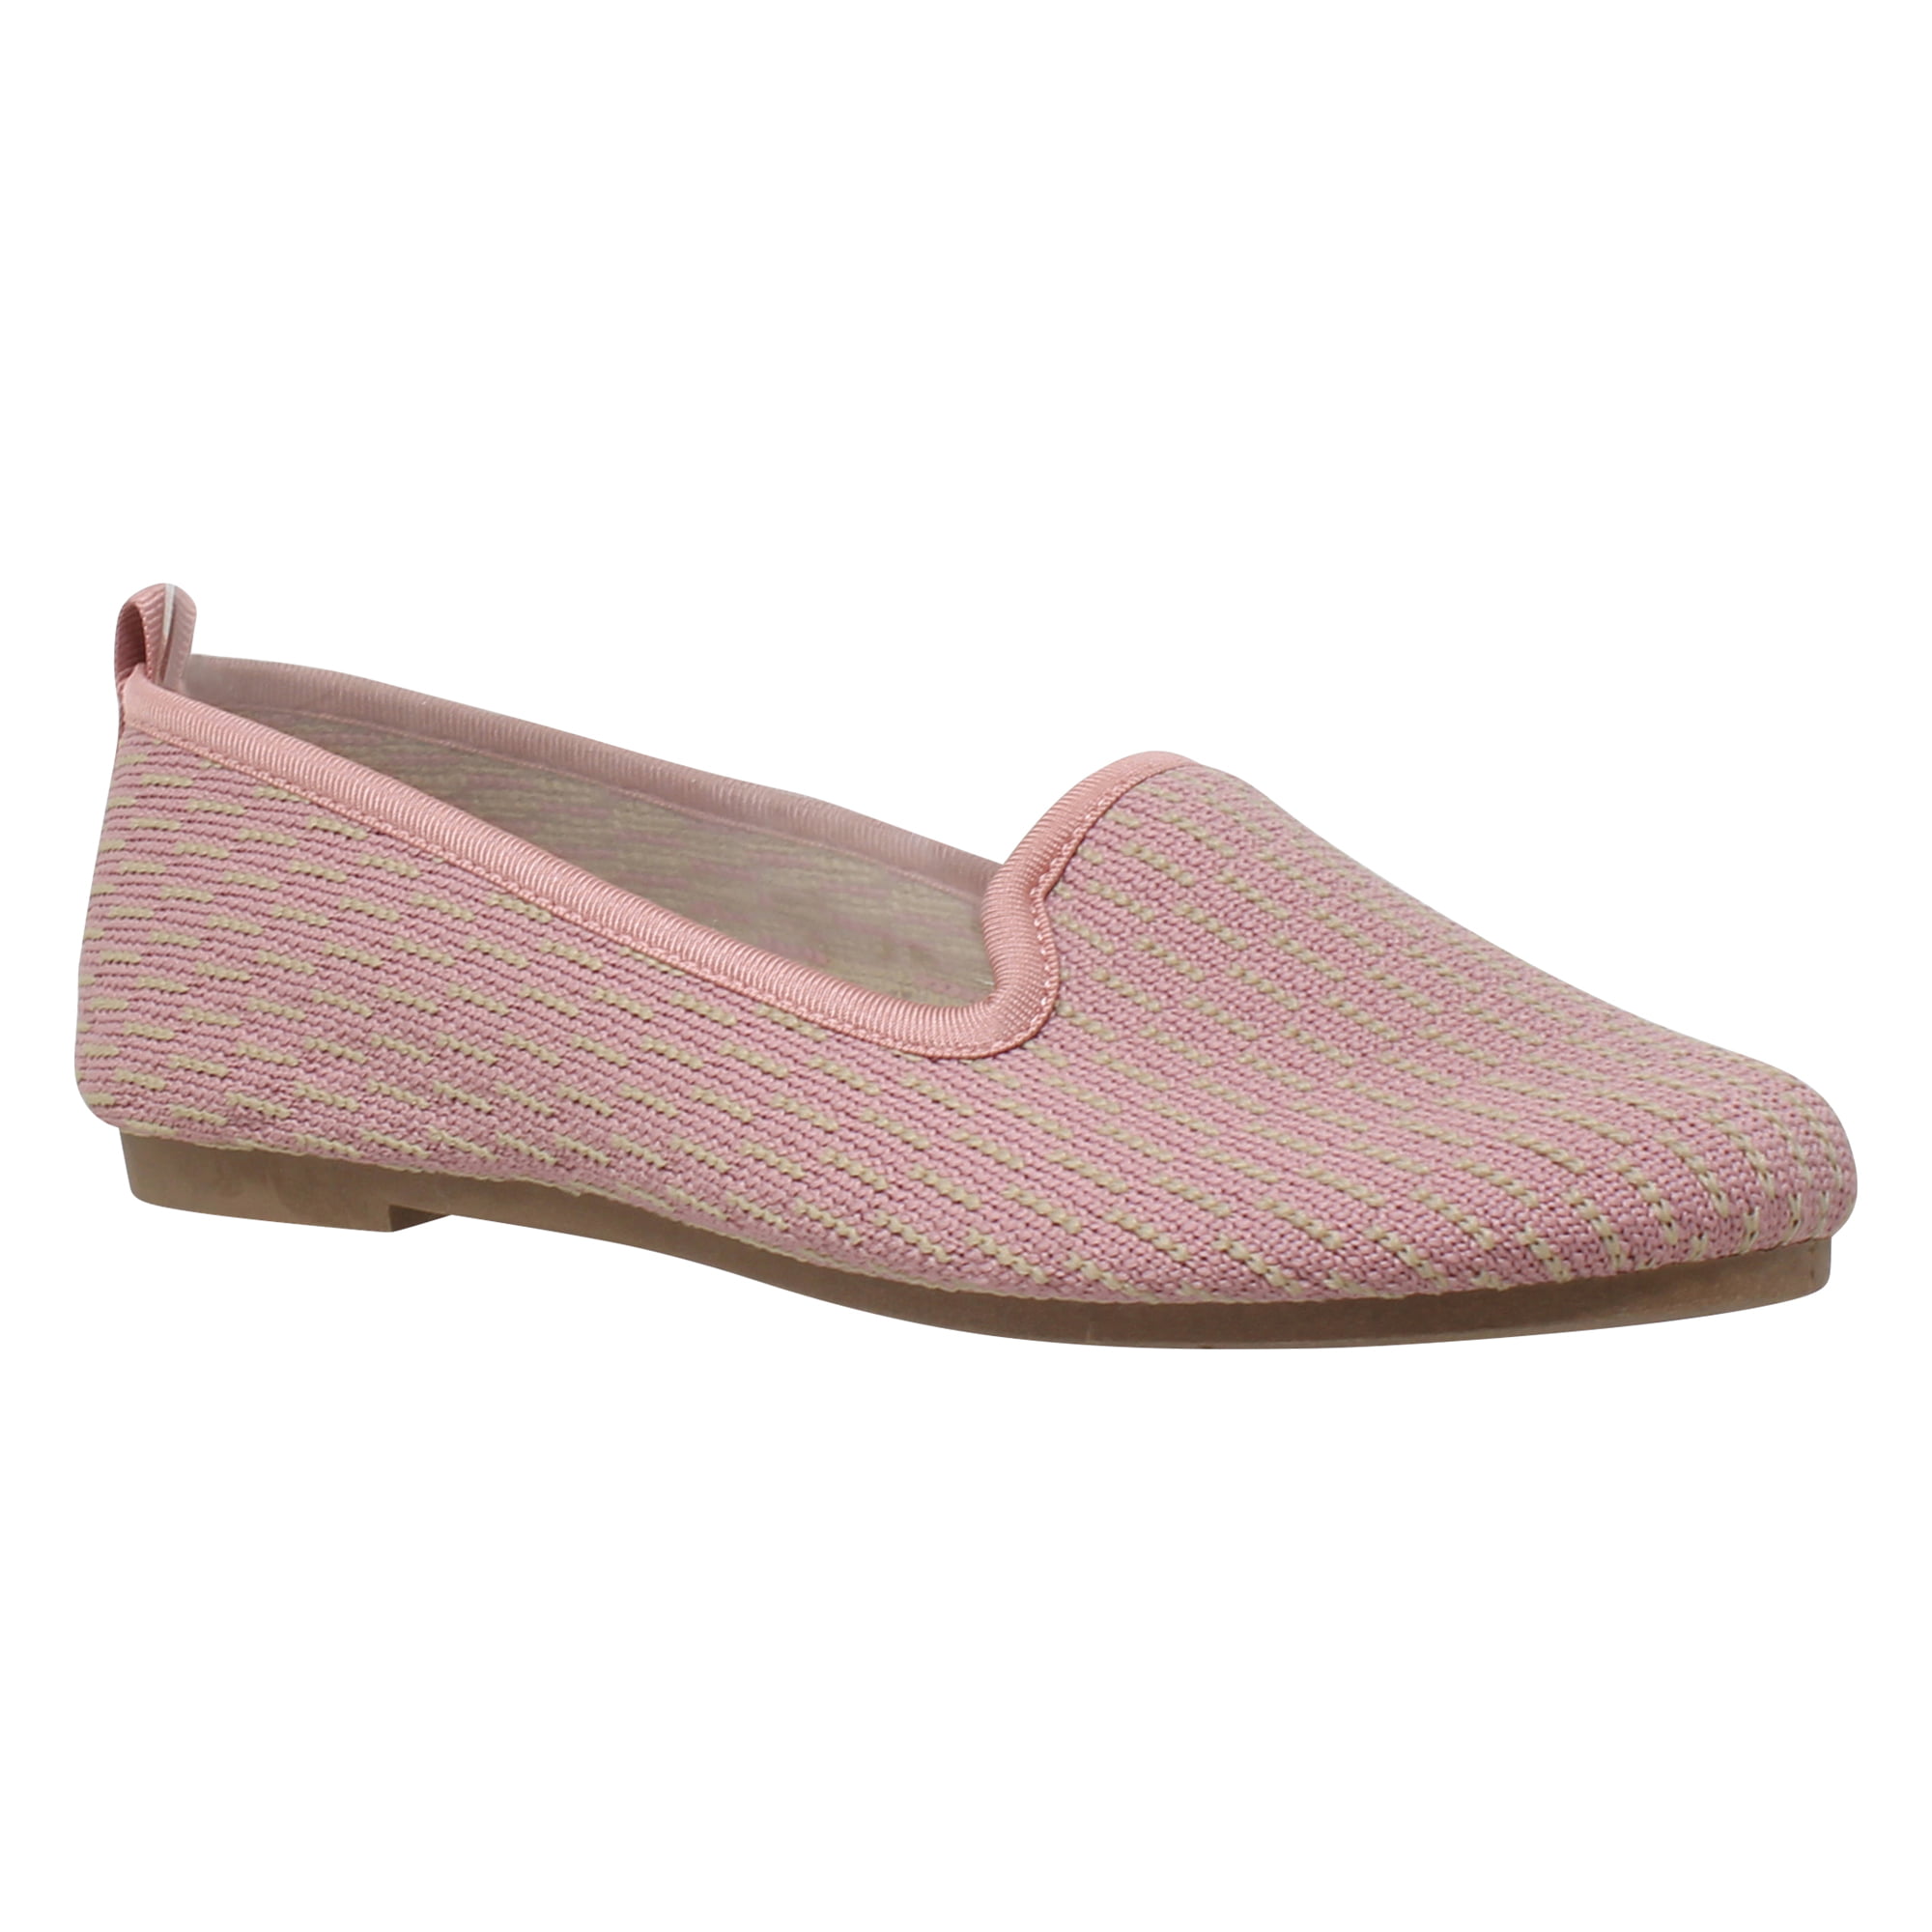 Women's Wal Mart Brand Ballet Flats Solid Pink Size 9.5  NEW Casual Shoes 